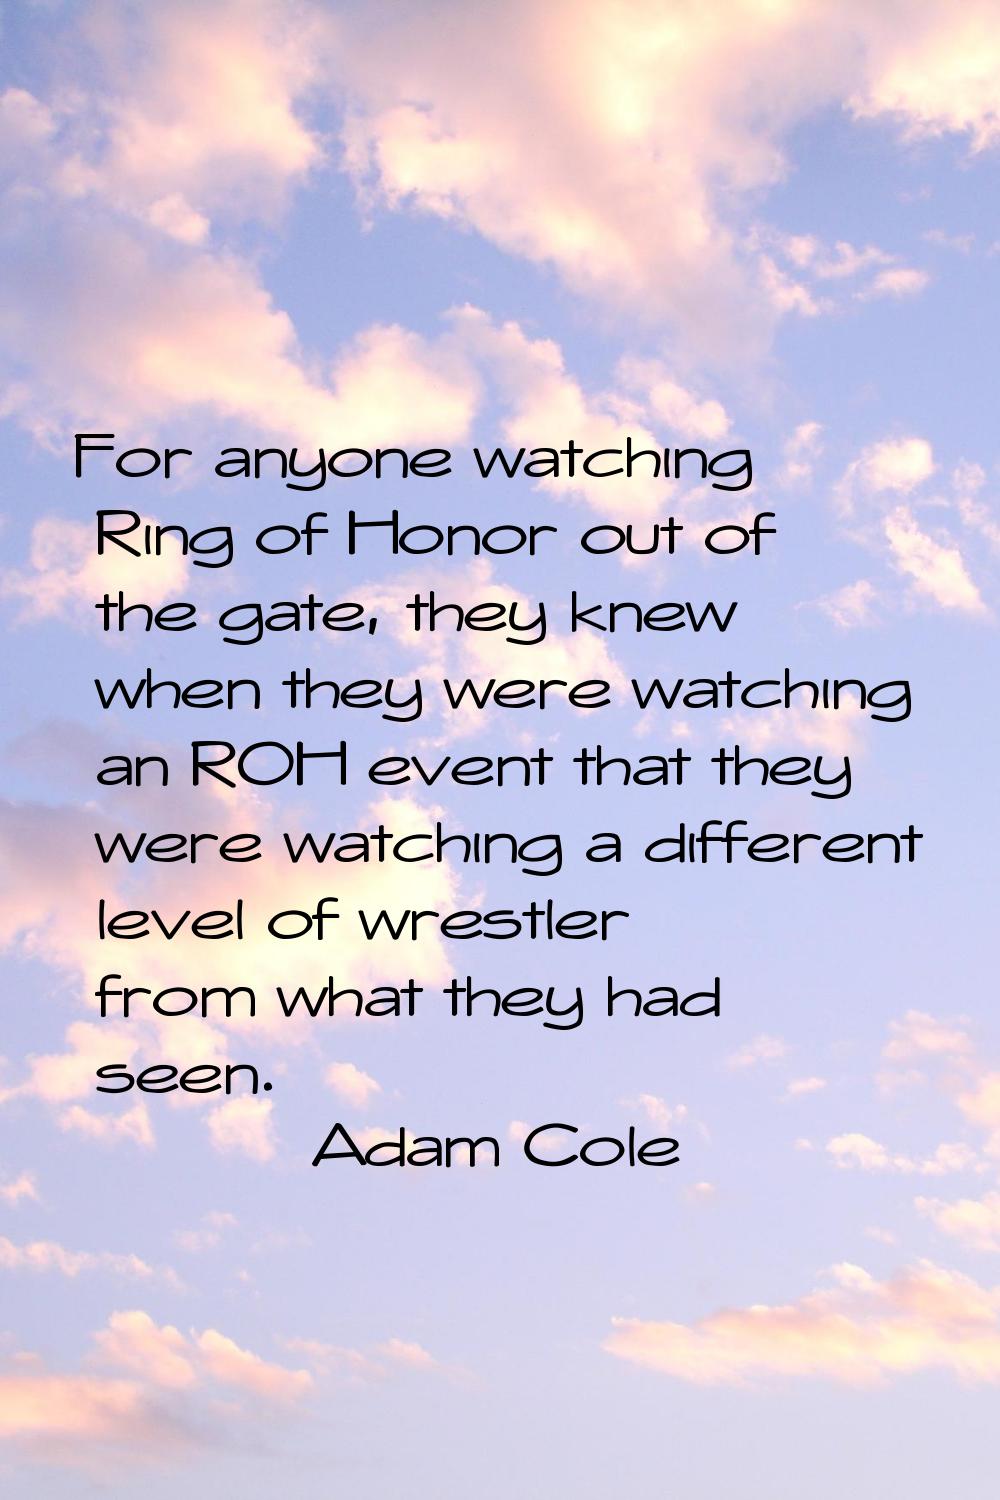 For anyone watching Ring of Honor out of the gate, they knew when they were watching an ROH event t